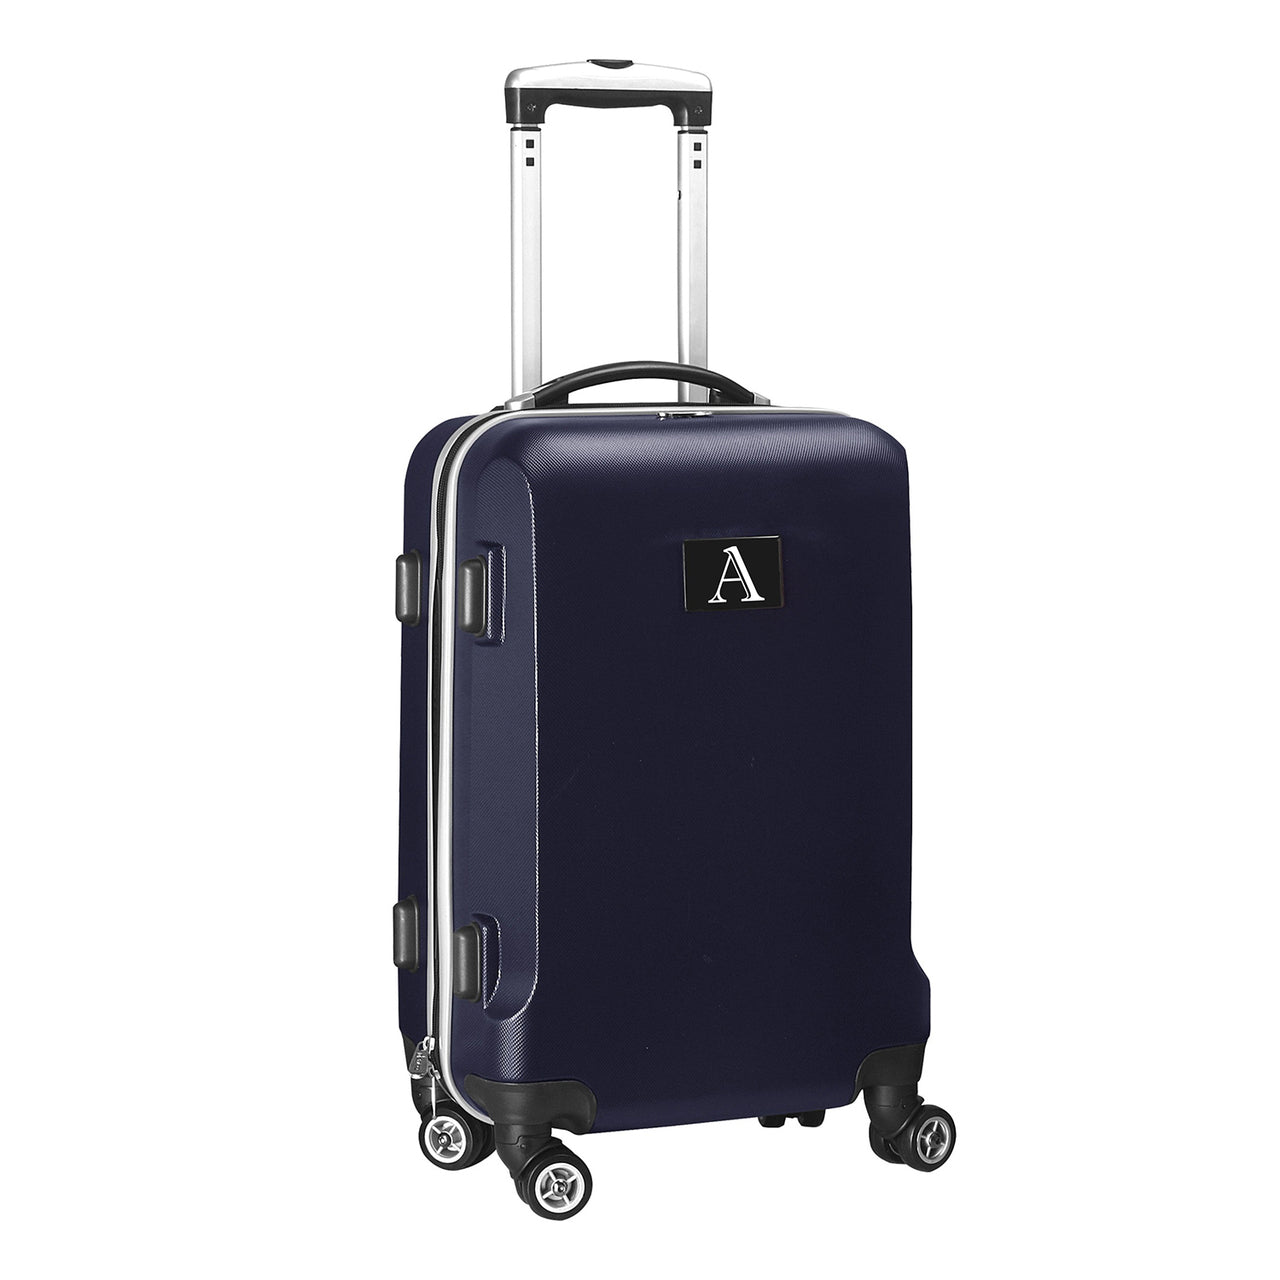 Personalized Initial Name letter "A" 20 inches Carry on Hardcase Spinner Luggage by Mojo  in NAVY